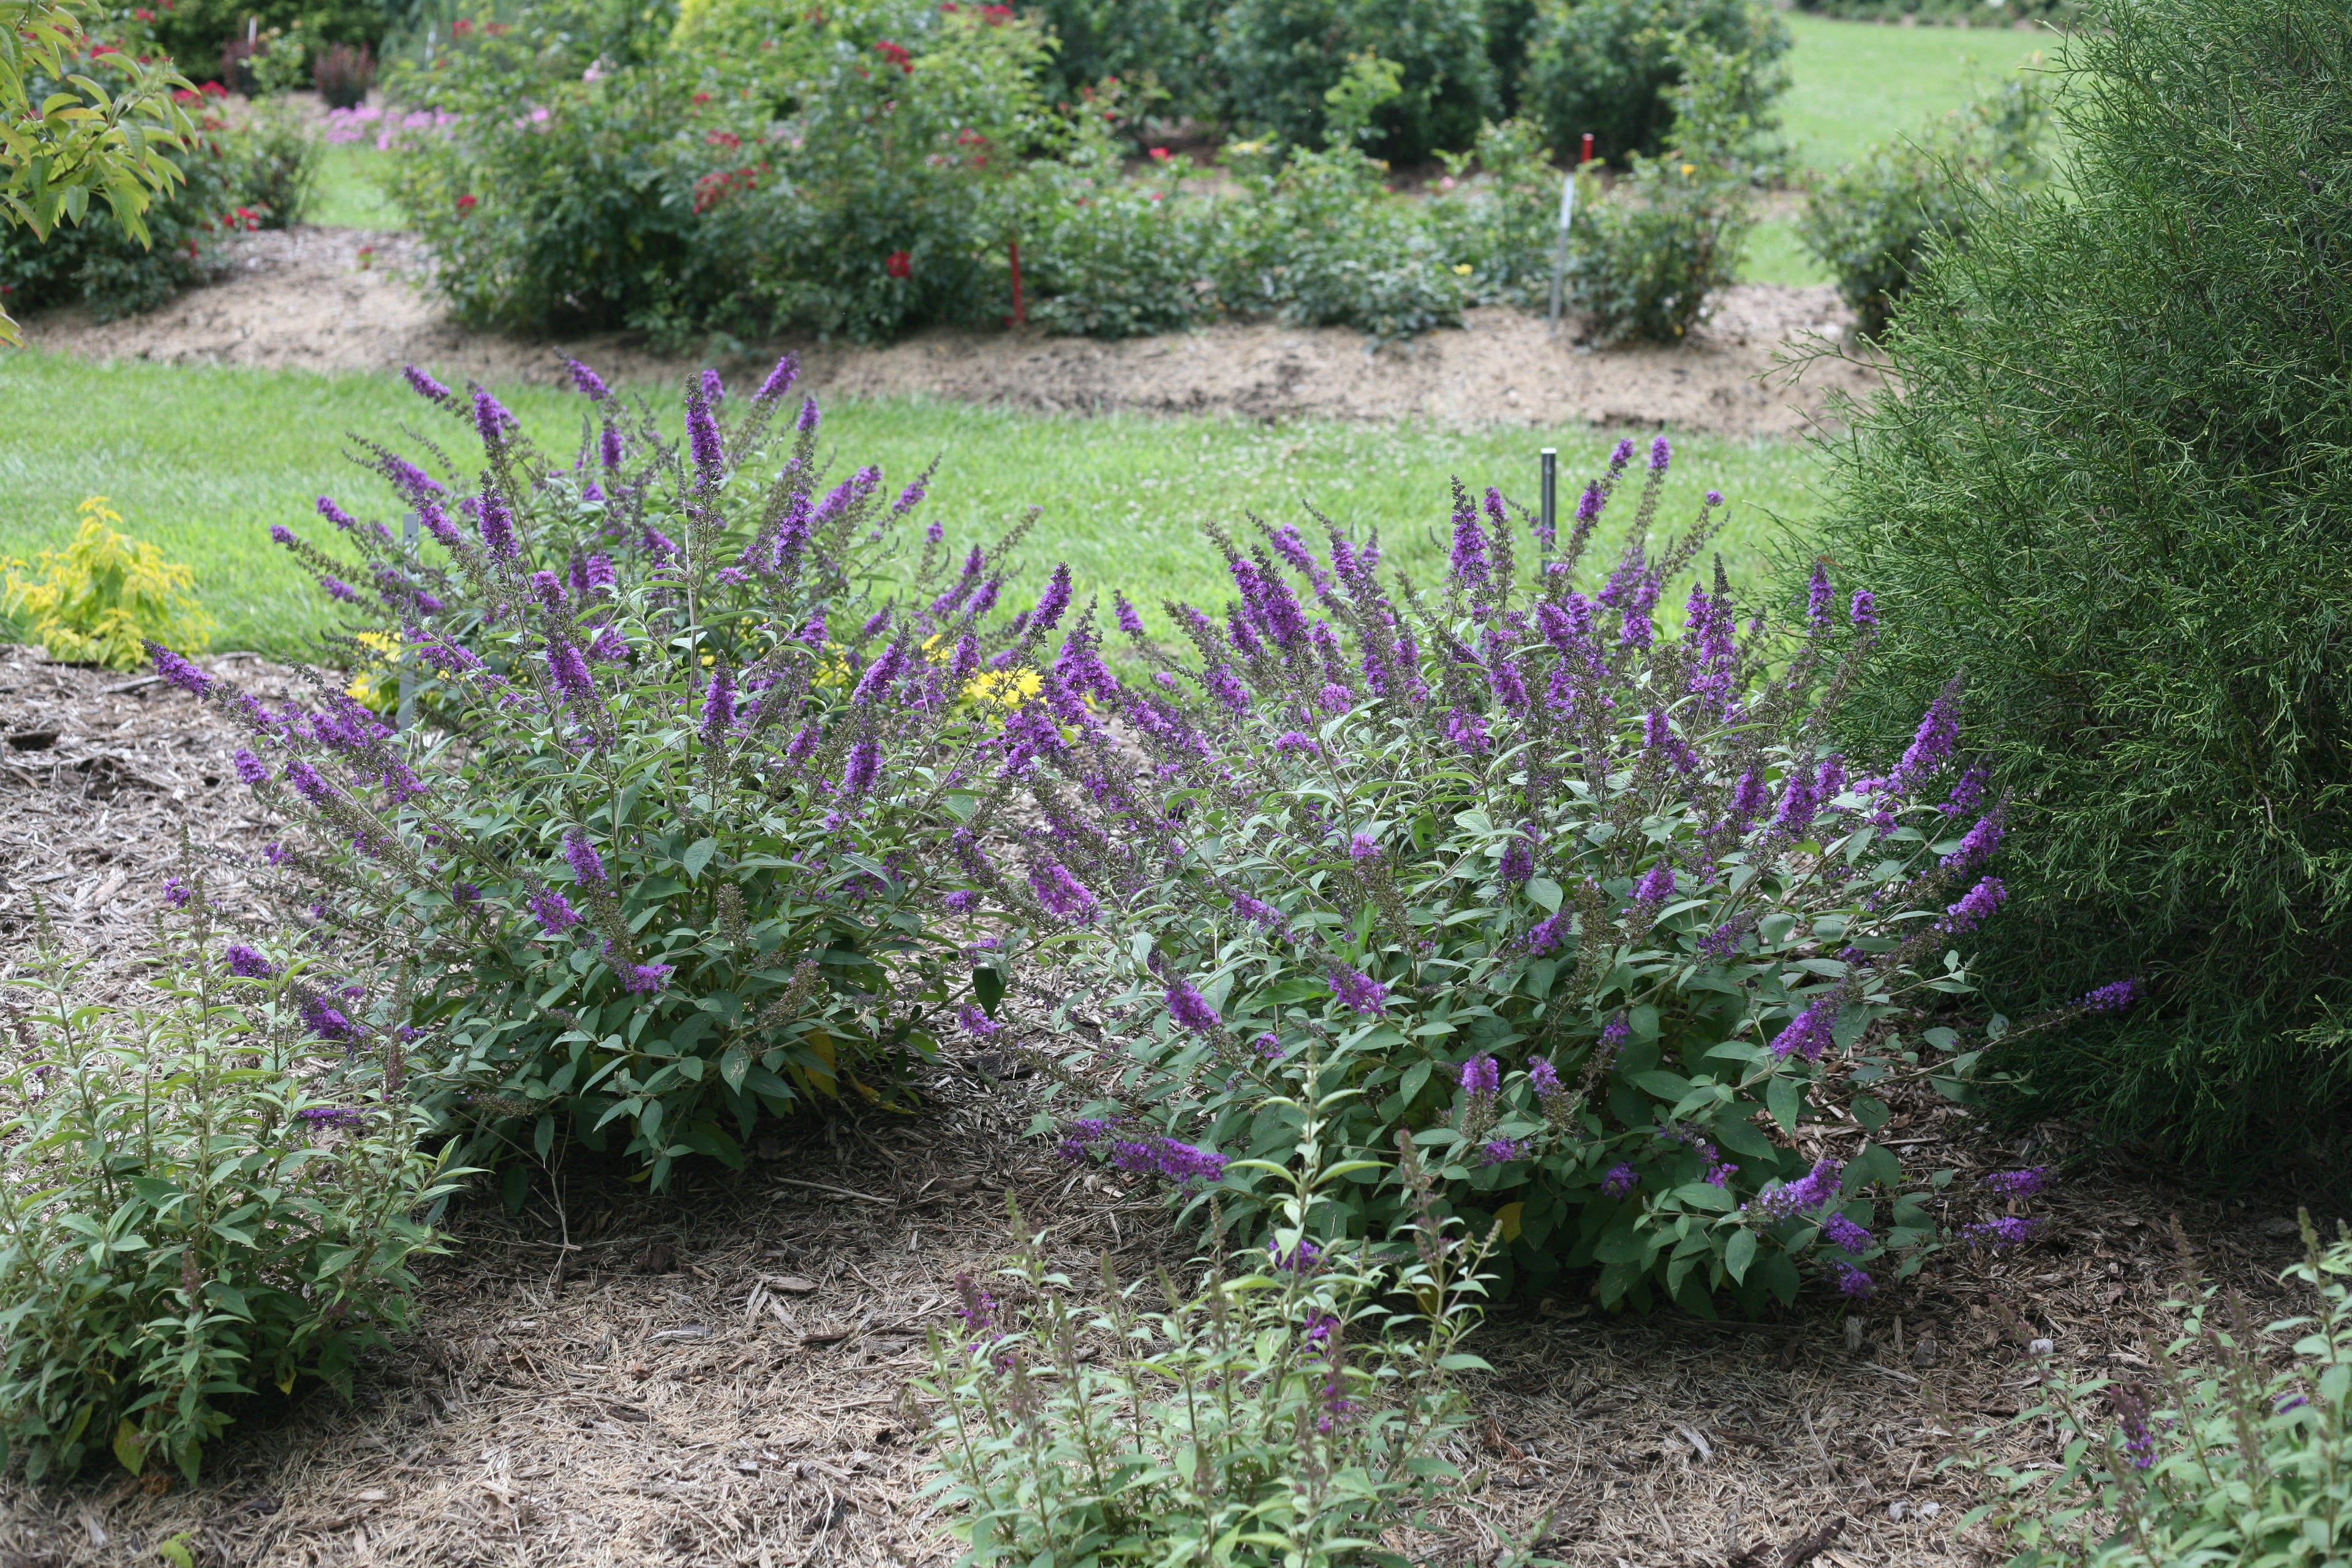 Three Lo and Behold Blue Chip Junior butterfly bushes covered in purple flower spikes